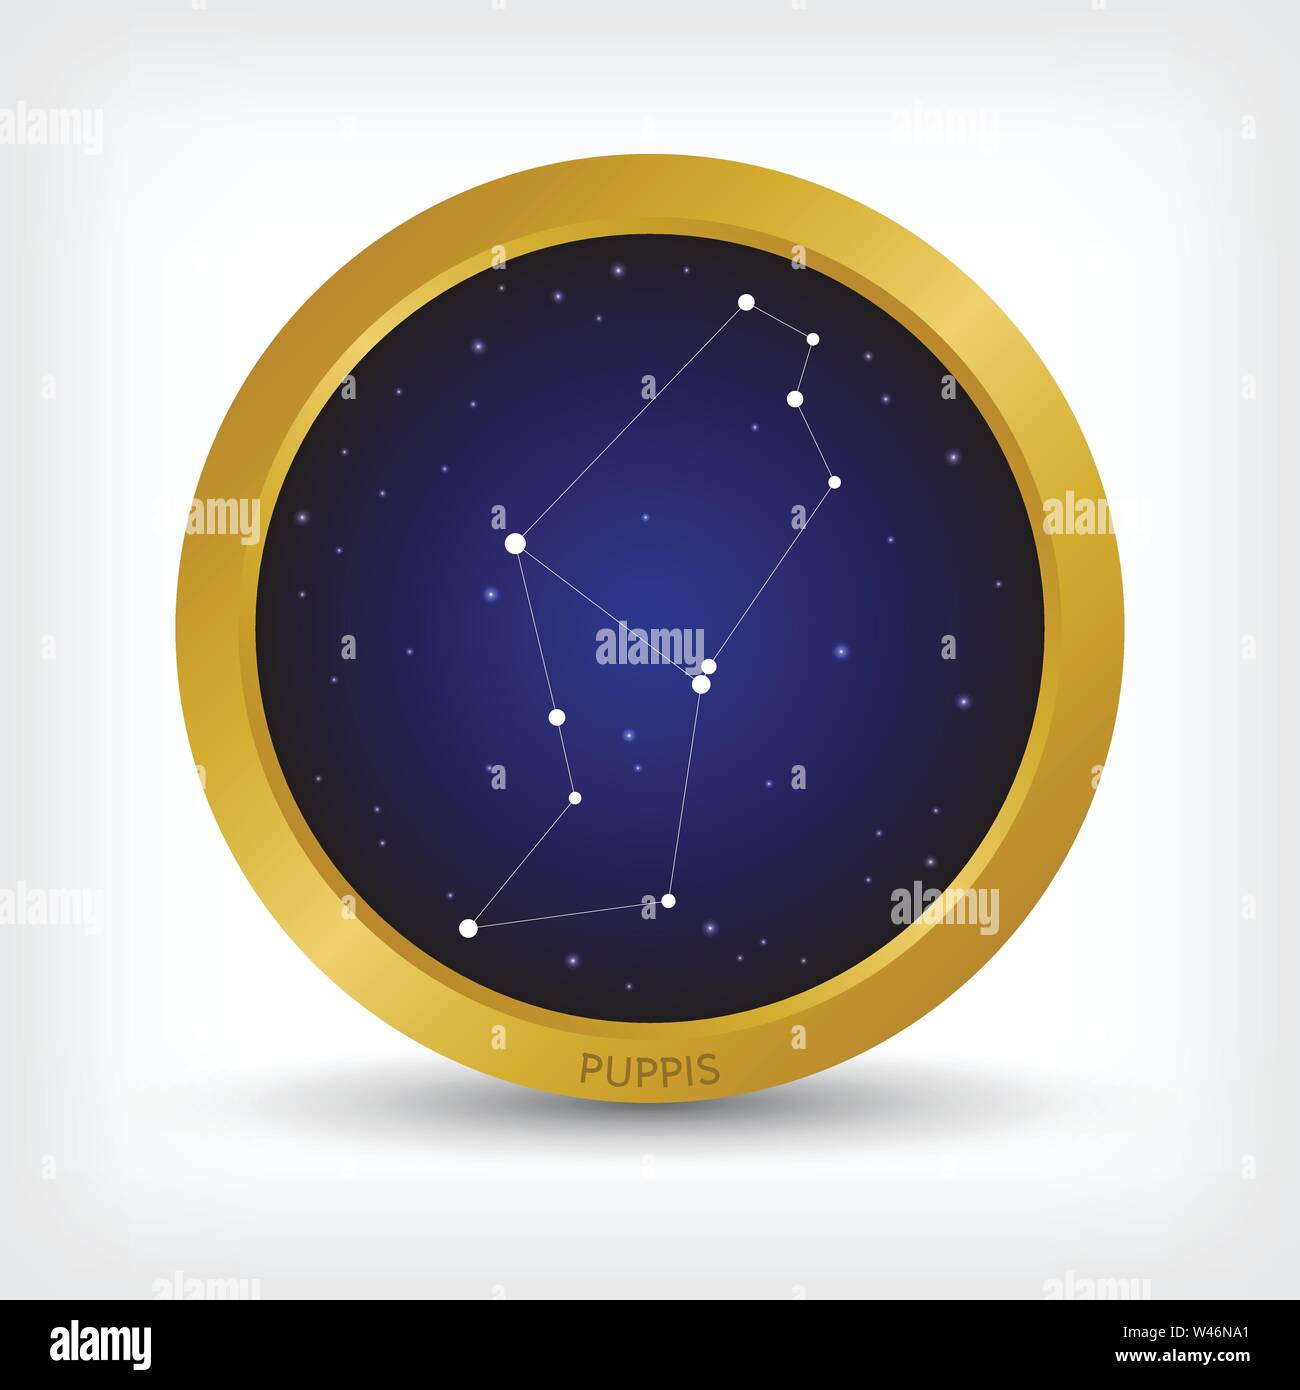 Puppis constellation in golden circle, group of star in galaxy, vector illustration Stock Vector